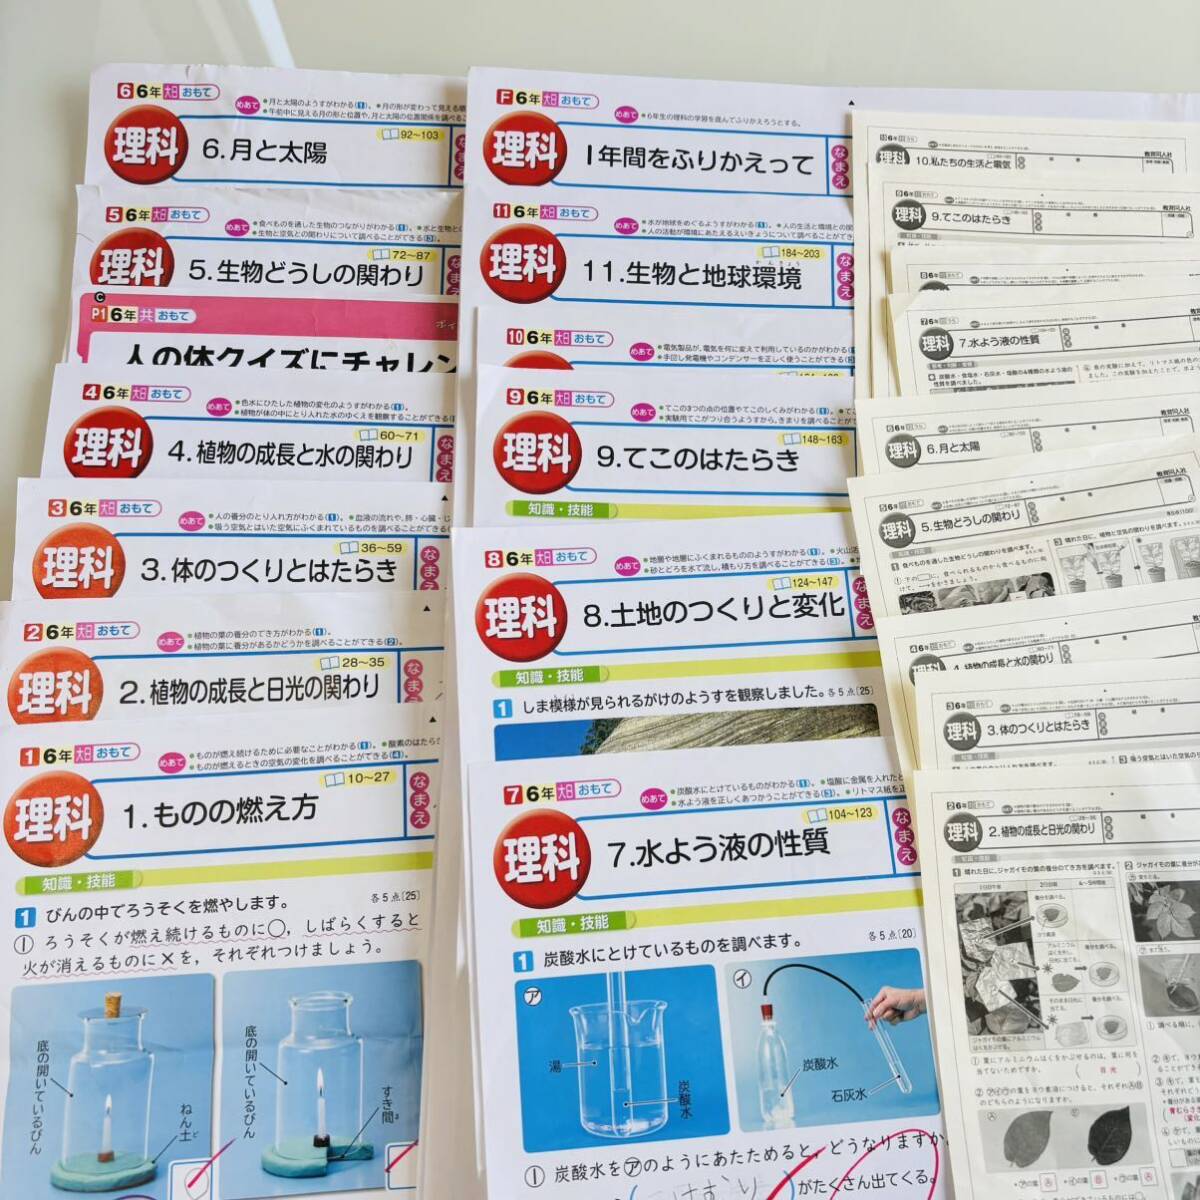  newest [ chronicle *. point ending ][ elementary school 6 year raw science ] answer attaching large Japan books education same person company color test inside . test measures . power improvement missing number none 